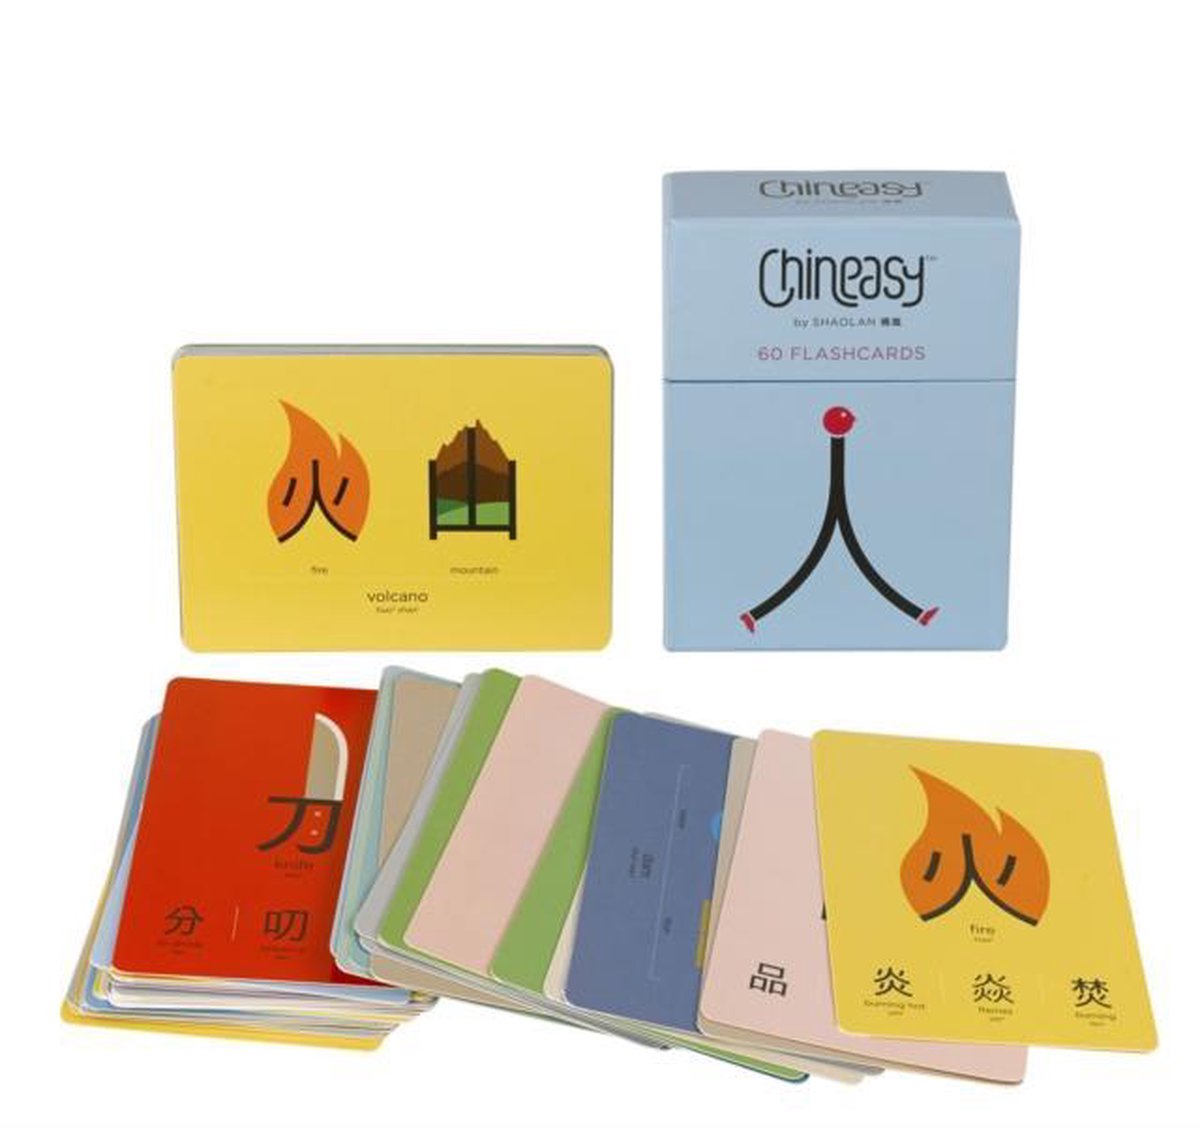 Chineasy - Shaolan